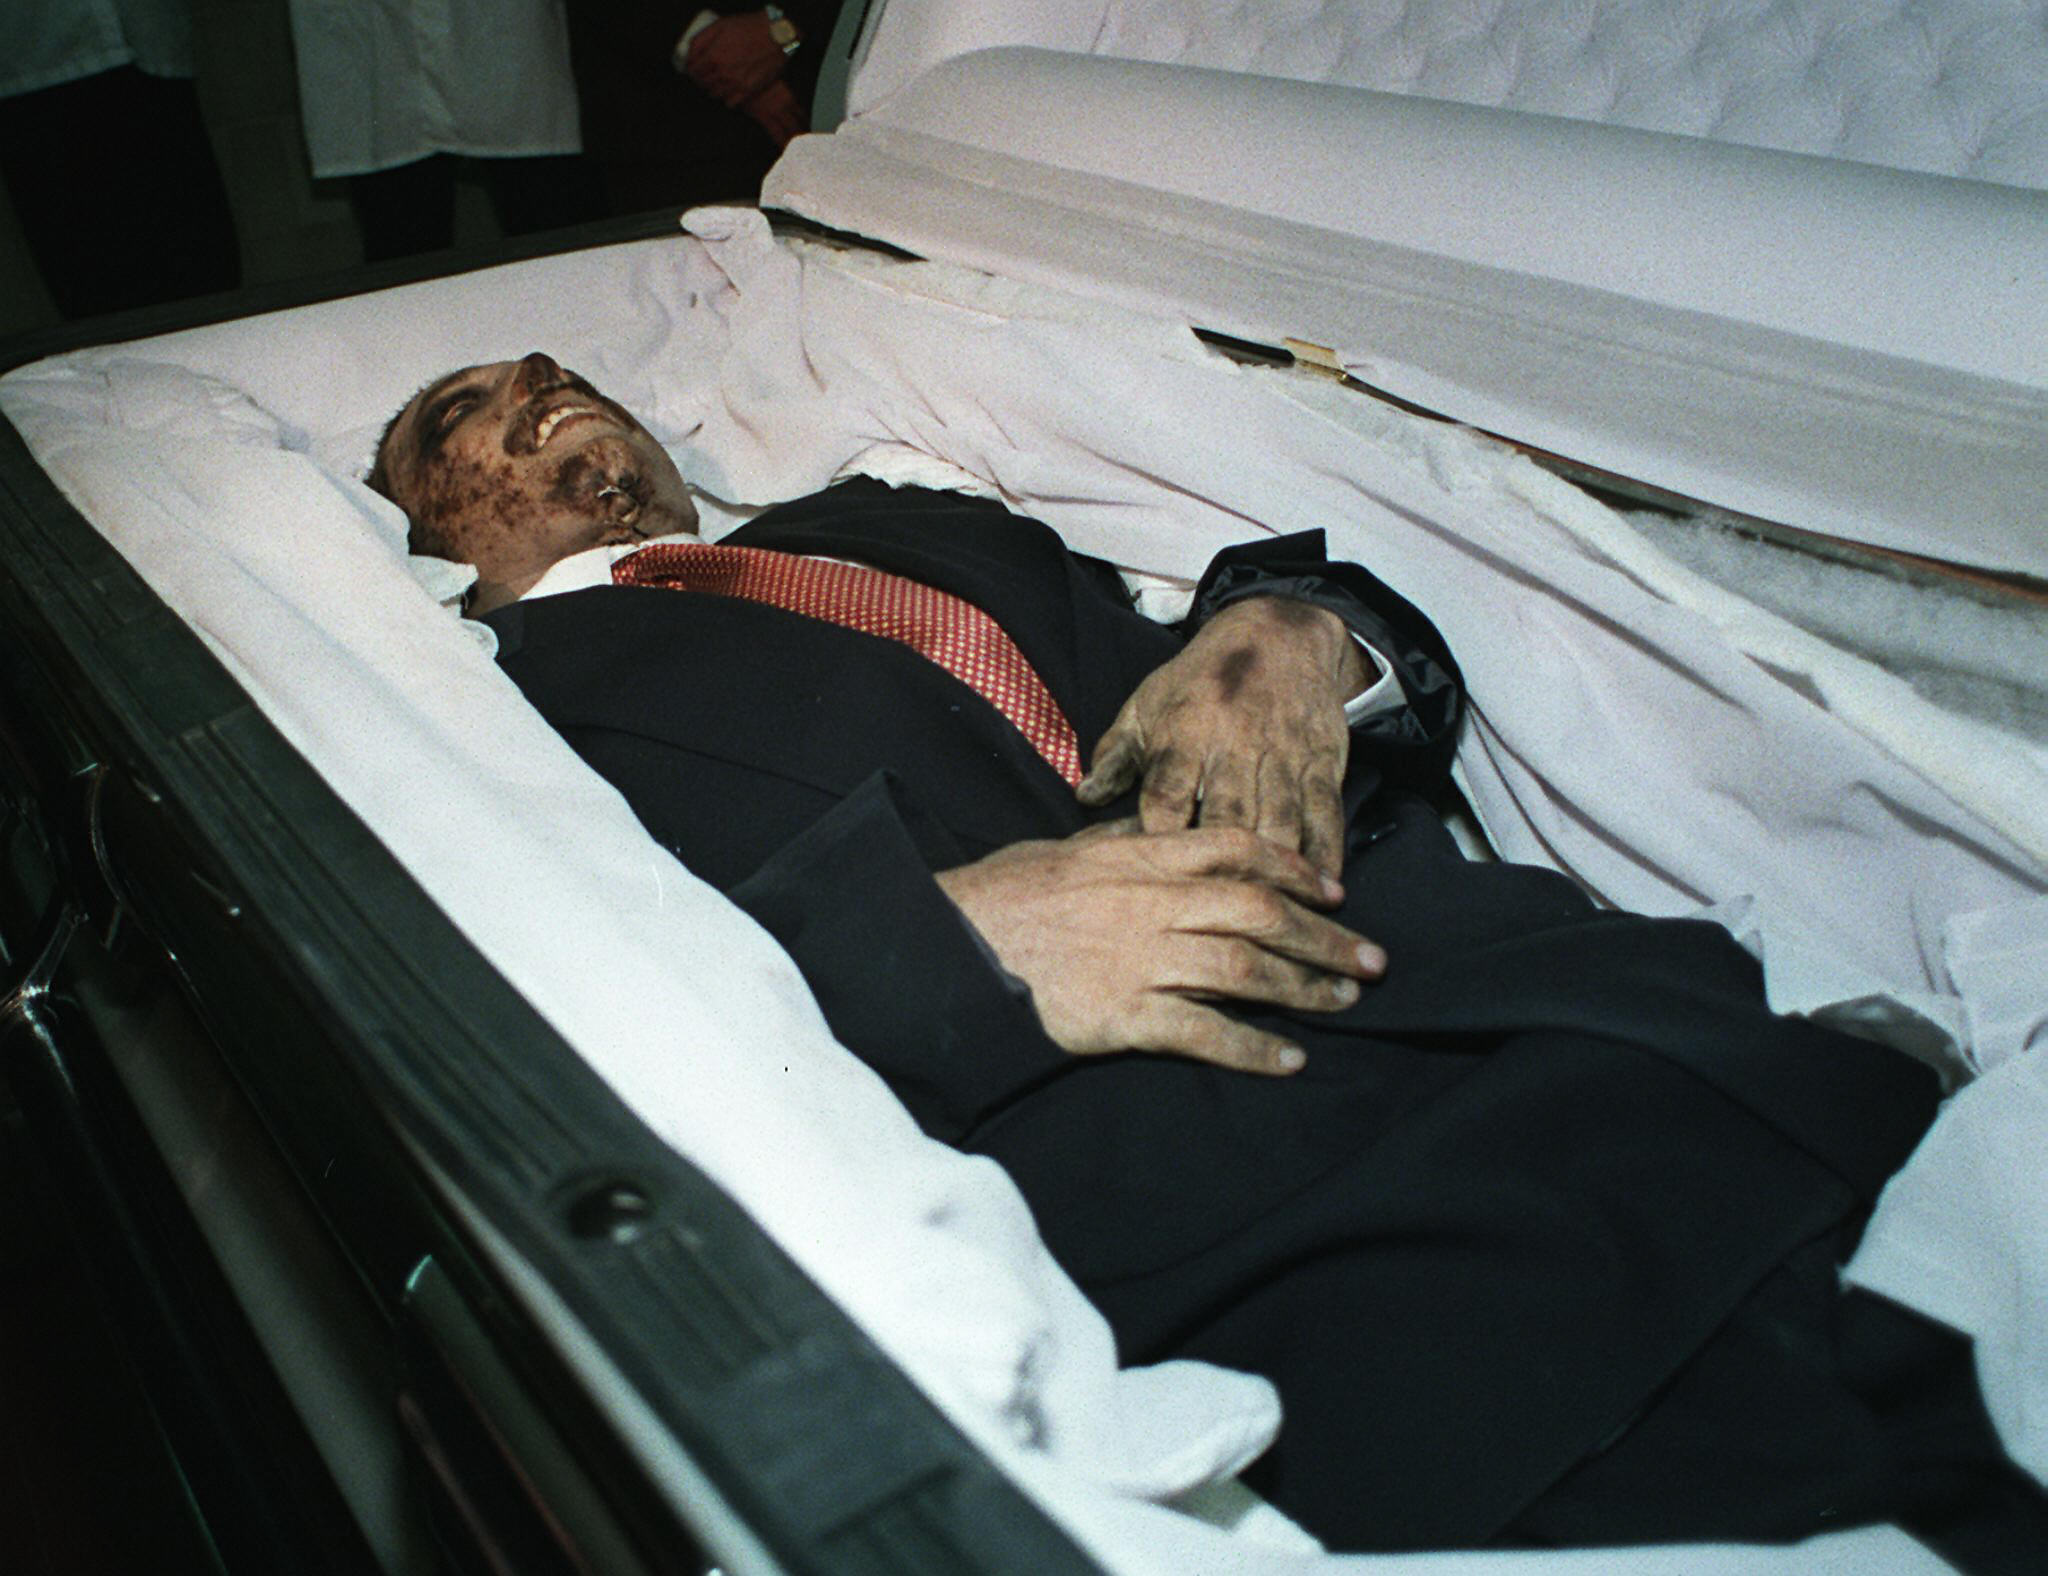 , considered Mexico's most powerful drug lord and head of the Juarez drug cartel, 07 July at a morgue in Mexico City. US anti-drug officials confirmed that Carrillo Fuentes had died of a heart attack 04 July while undergoing plastic surgery and liposuction to alter his appearance. The Mexican government has not issued a confirmation on the identity of the body but the US State department announced 07 July that US drug agents said the body had been positively identified. AFP PHOTO/Omar TORRES (Photo credit should read OMAR TORRES/AFP/Getty Images)